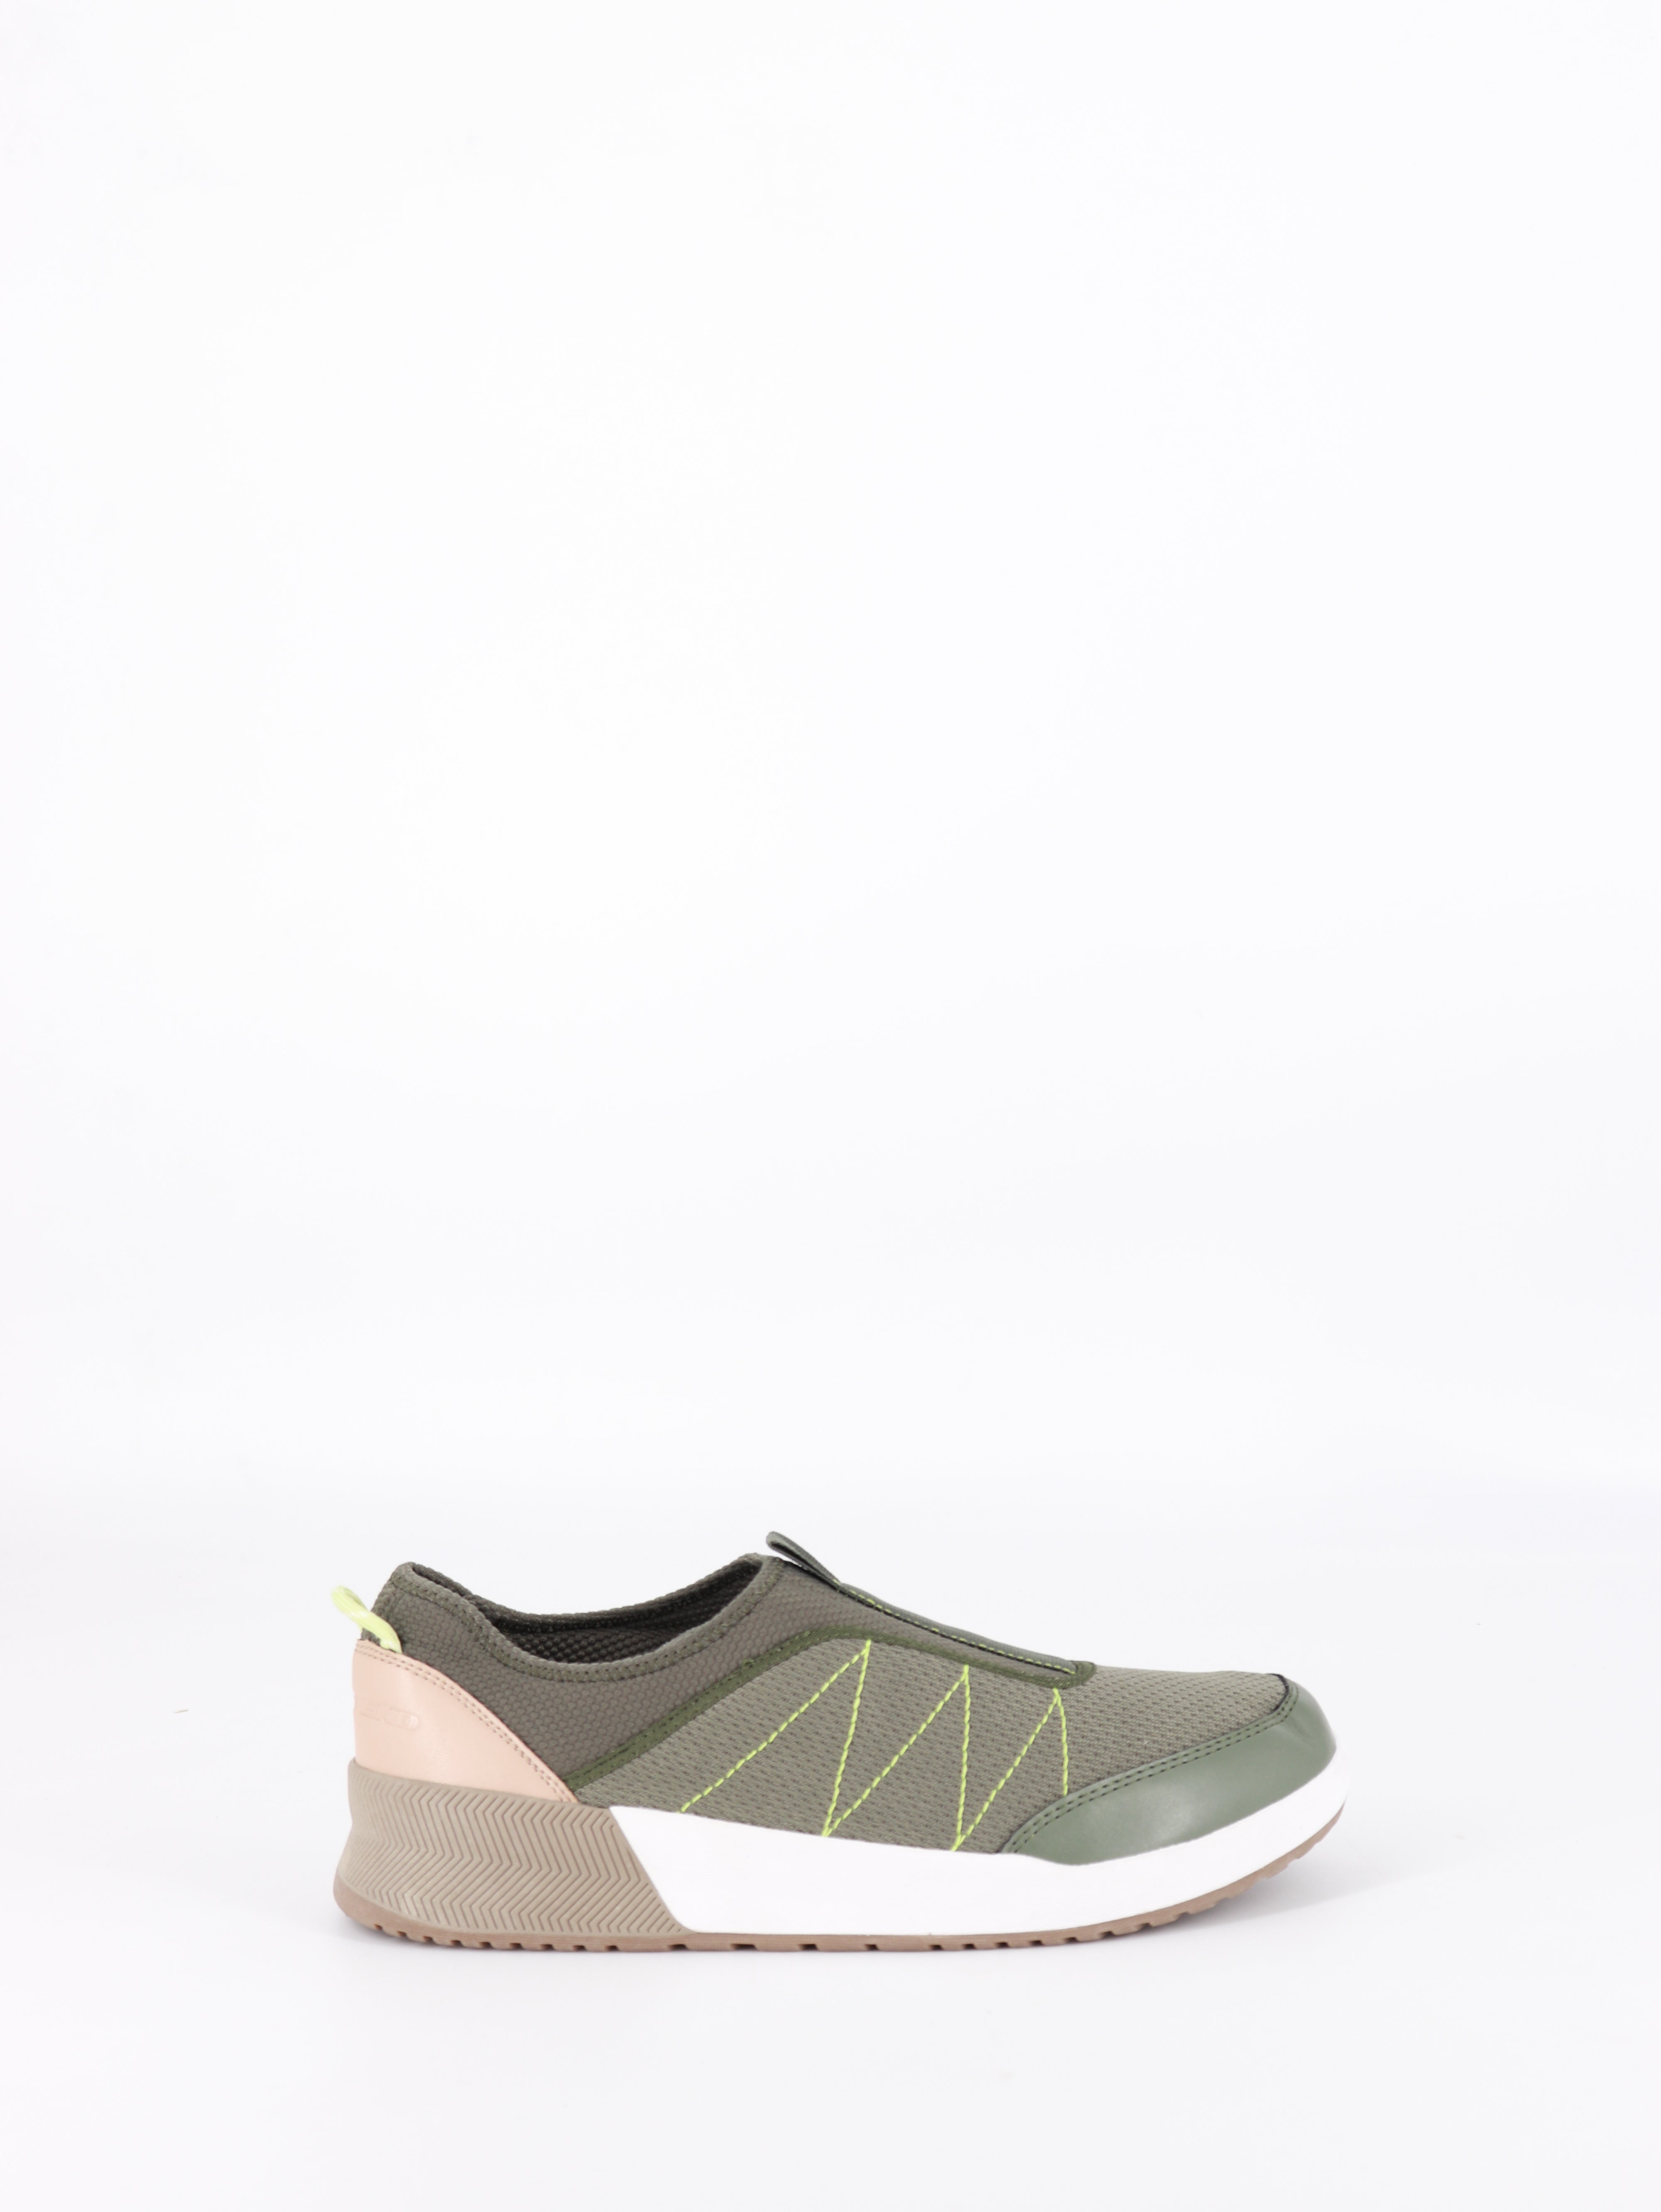 LANDS END Tenis Clasico Deportivo - Mujer - US 11